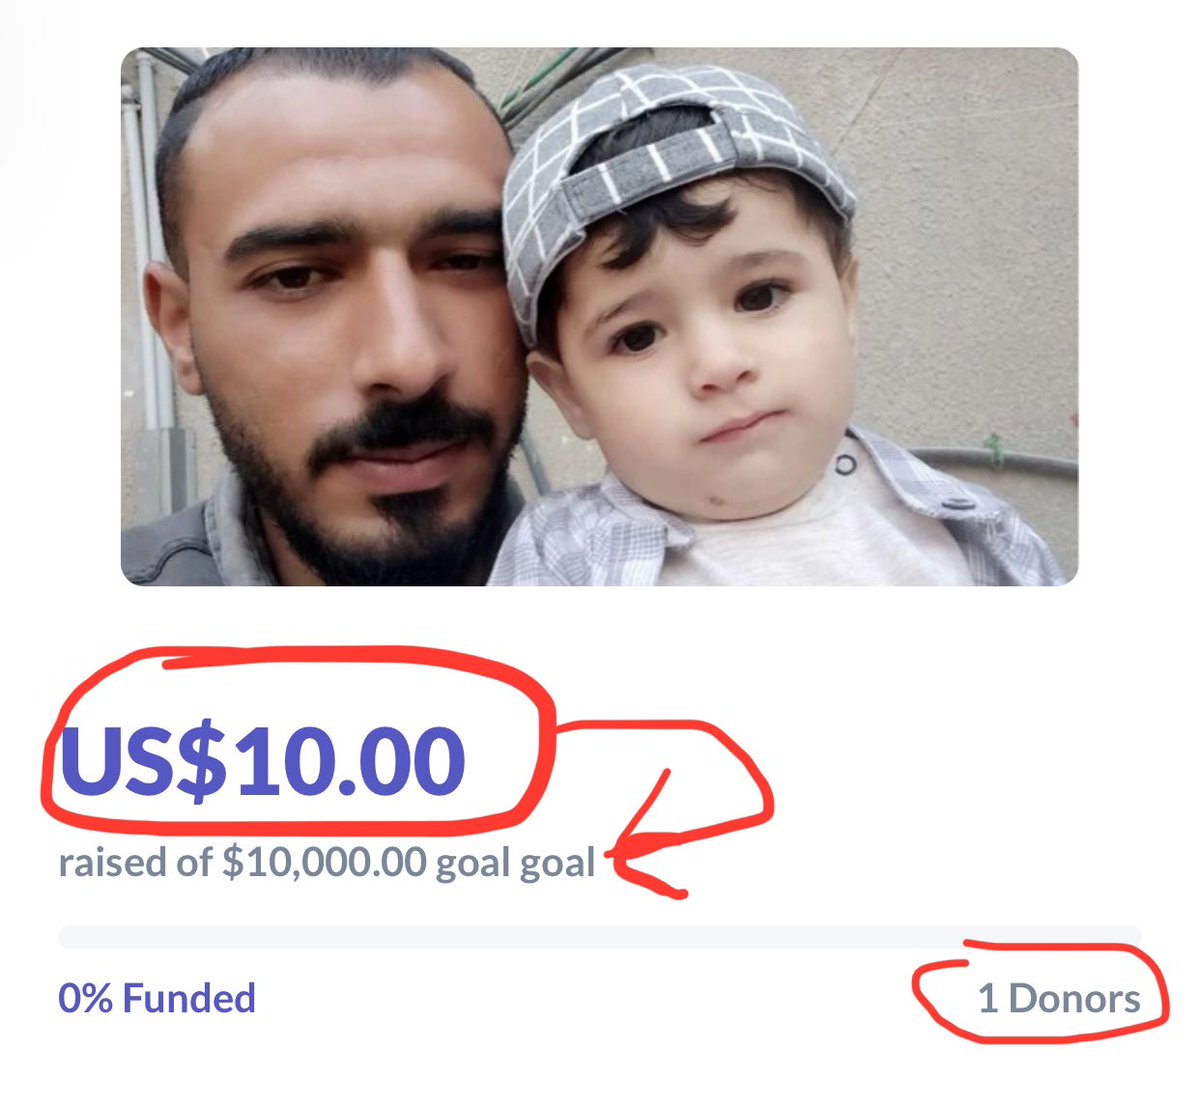 PLEASE HELP ABDAL HADI WITH GETTING DONATIONS FOR HIS CAMPAIGN. HE HAS ONLY GOTTEN ONE DONATION SO FAR AND HE NEEDS TO REACH HIS GOAL TO EVACUATE HIS FAMILY OUT OF GAZA! Donate ➡️ gogetfunding.com/we-hope-for-yo…